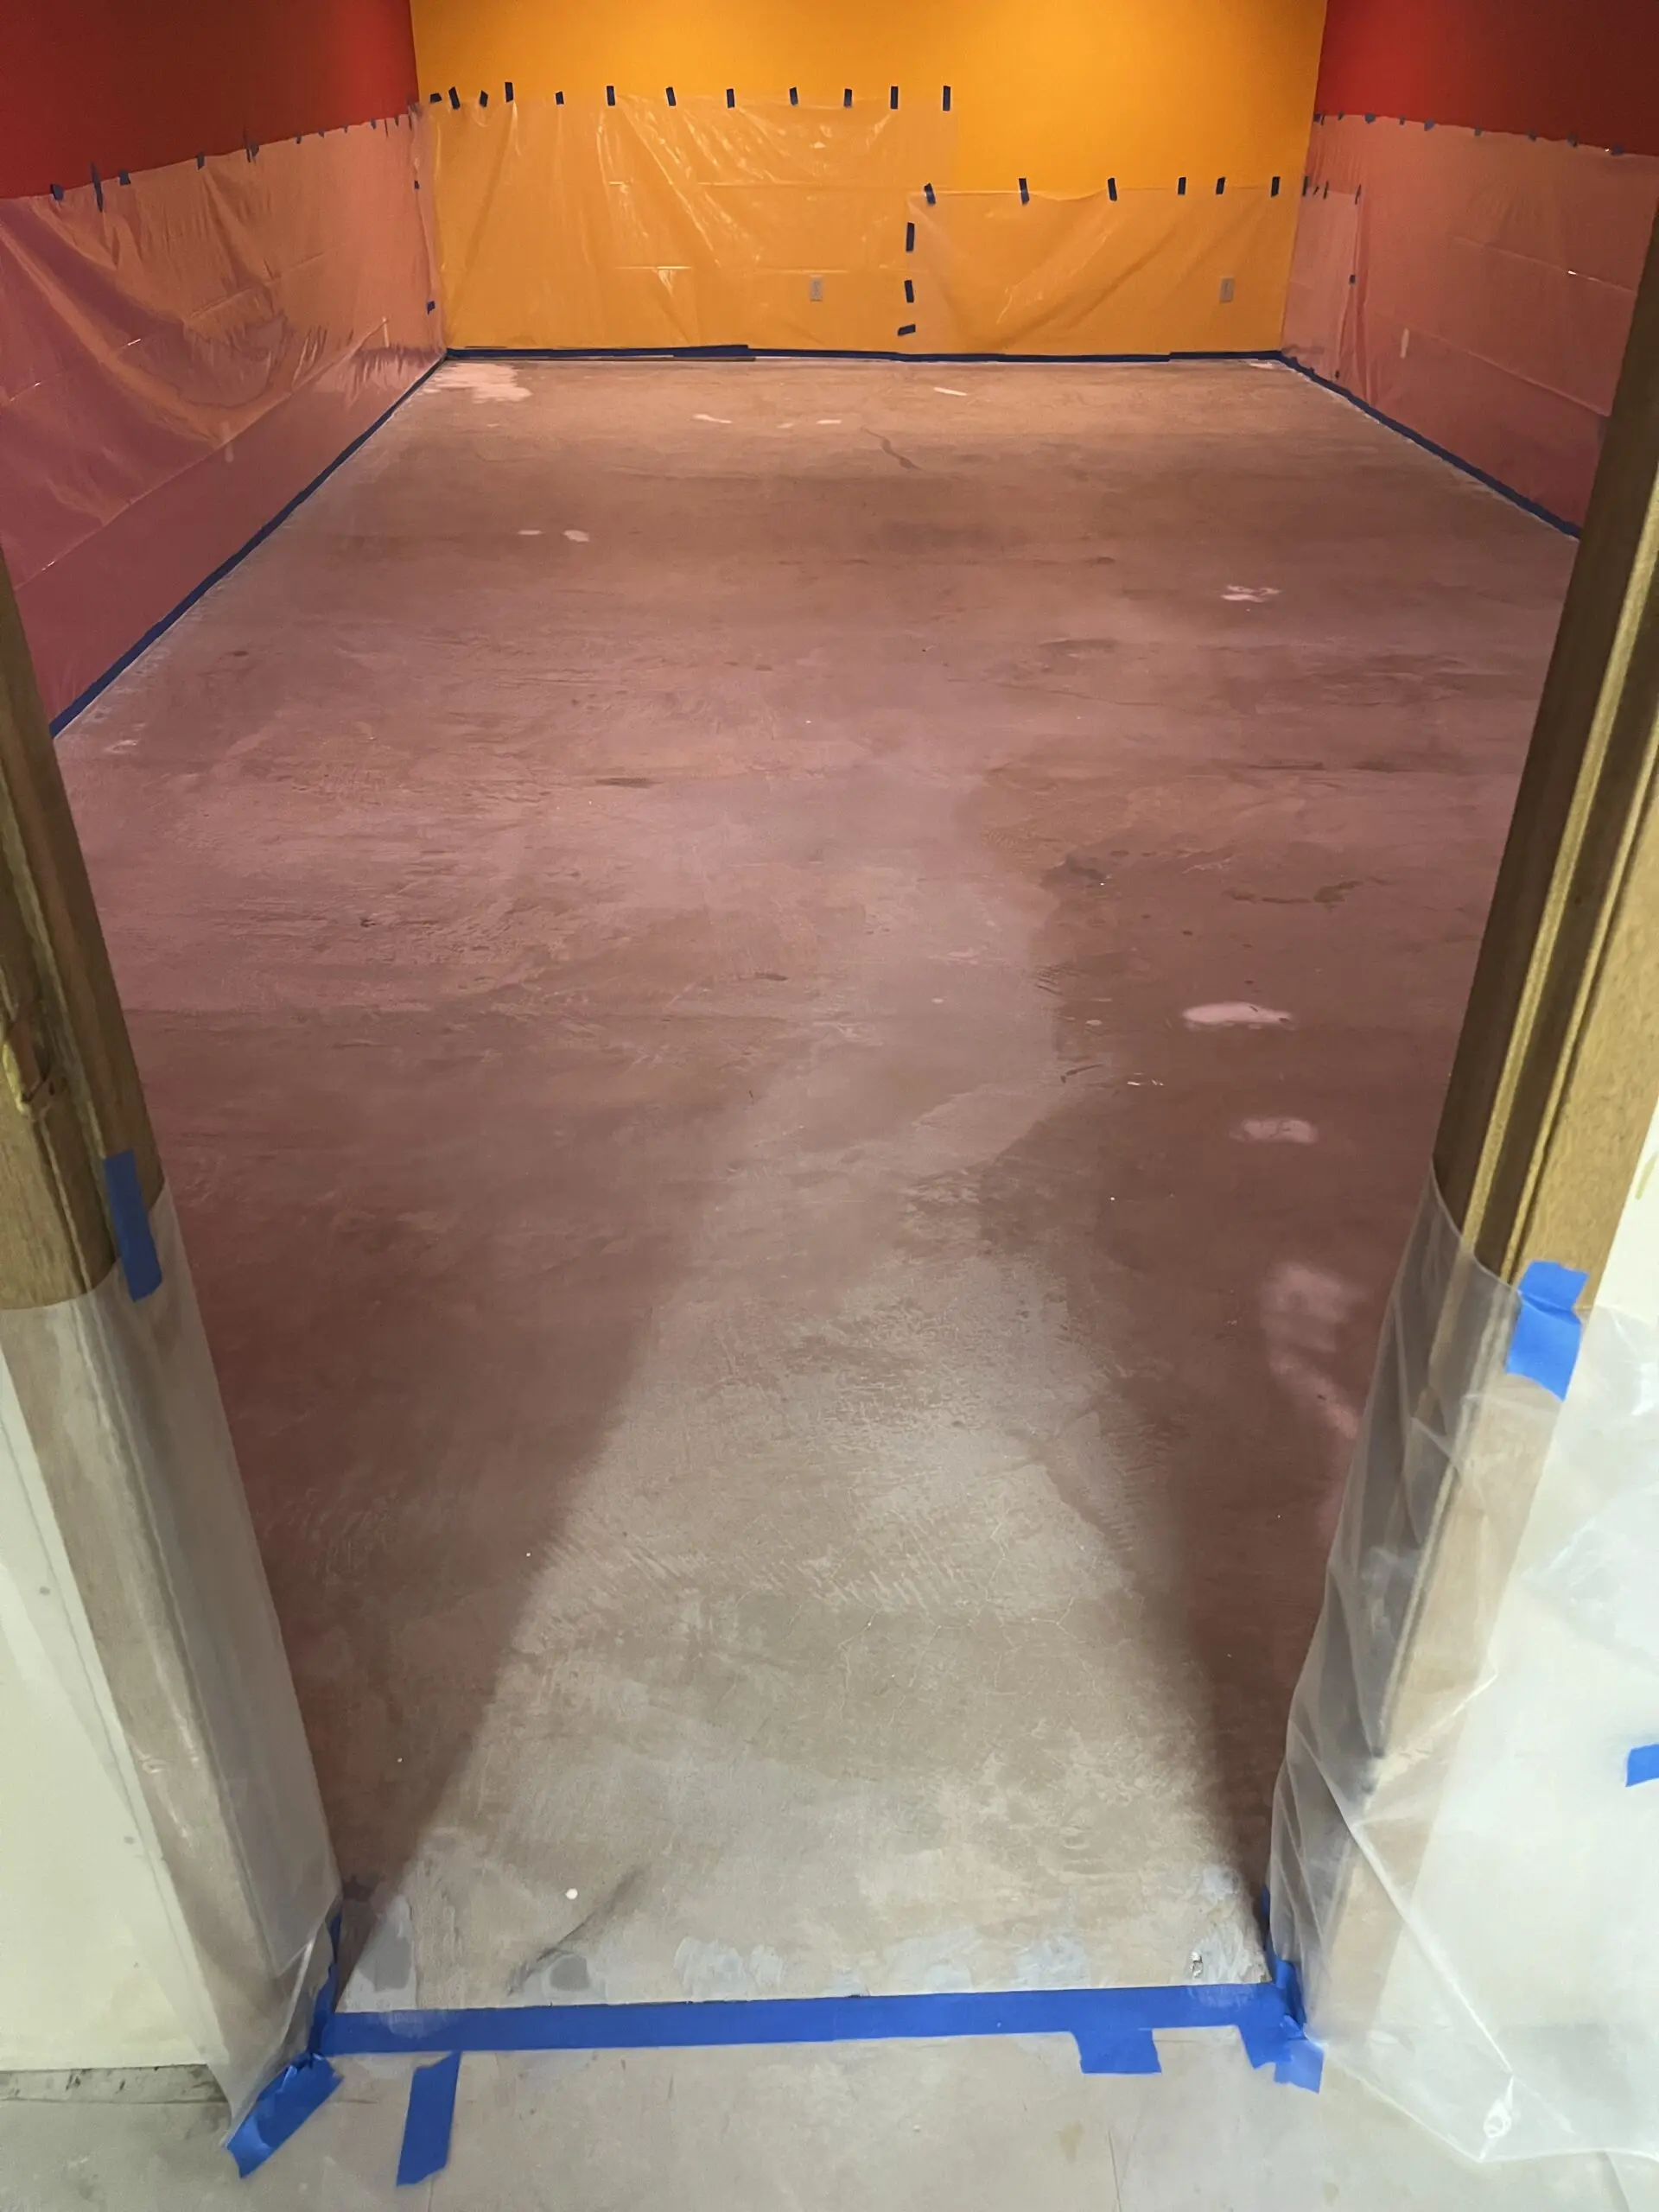 Unfinished floor with visible imperfections and paint spots prior to staining